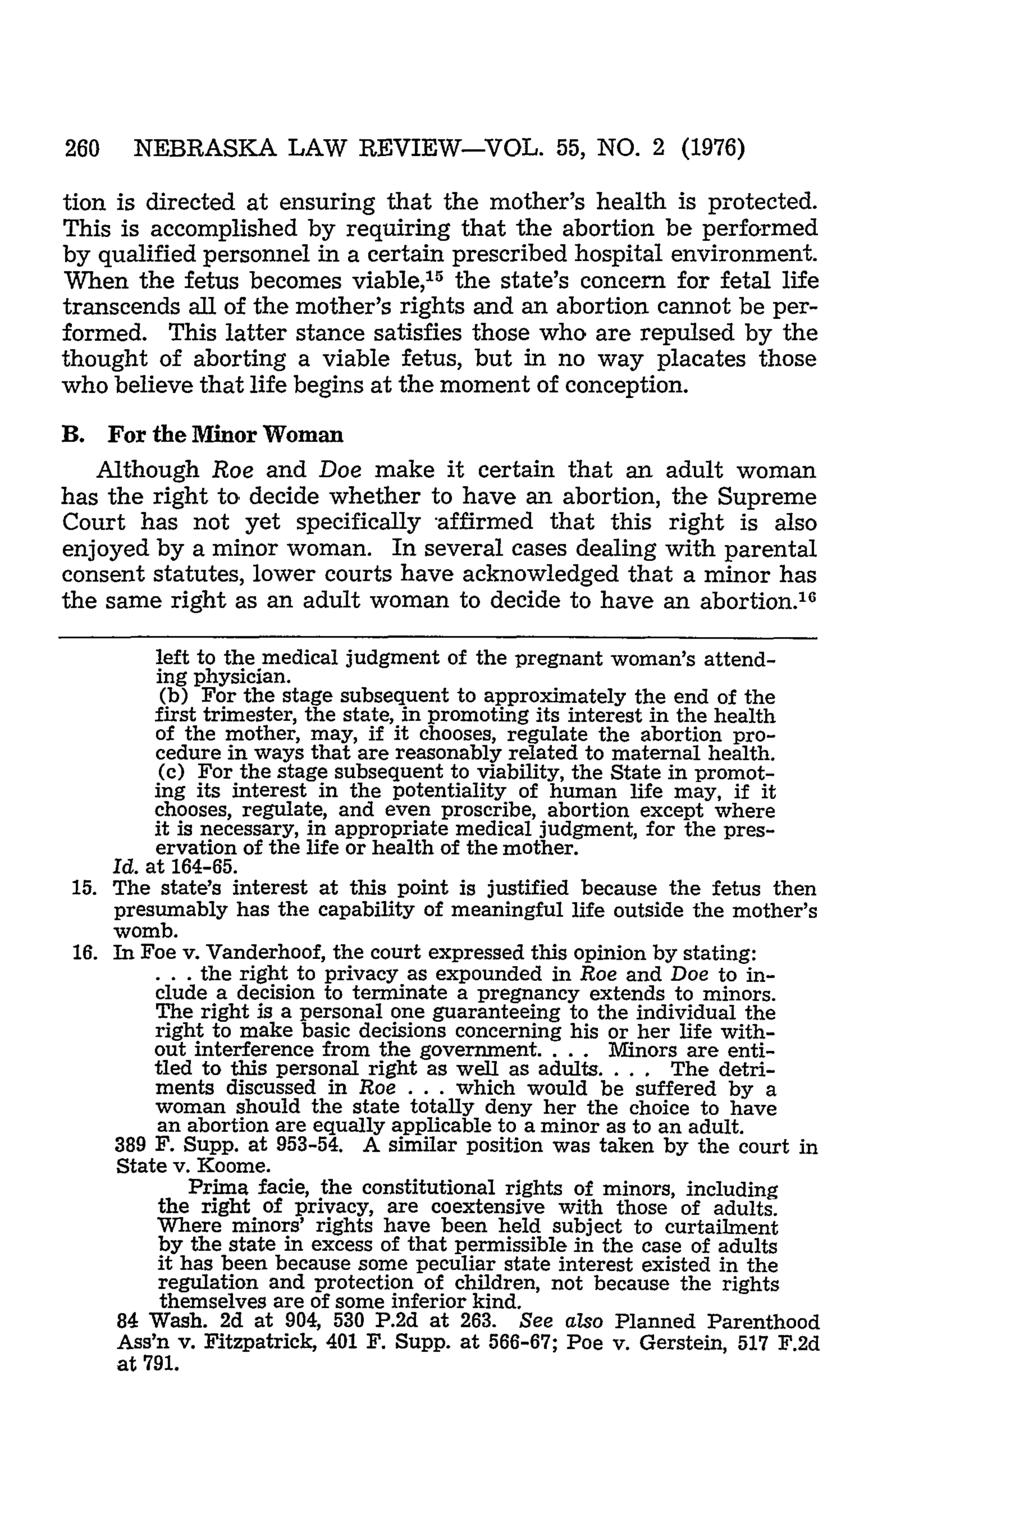 260 NEBRASKA LAW REVIEW-VOL. 55, NO. 2 (1976) tion is directed at ensuring that the mother's health is protected.